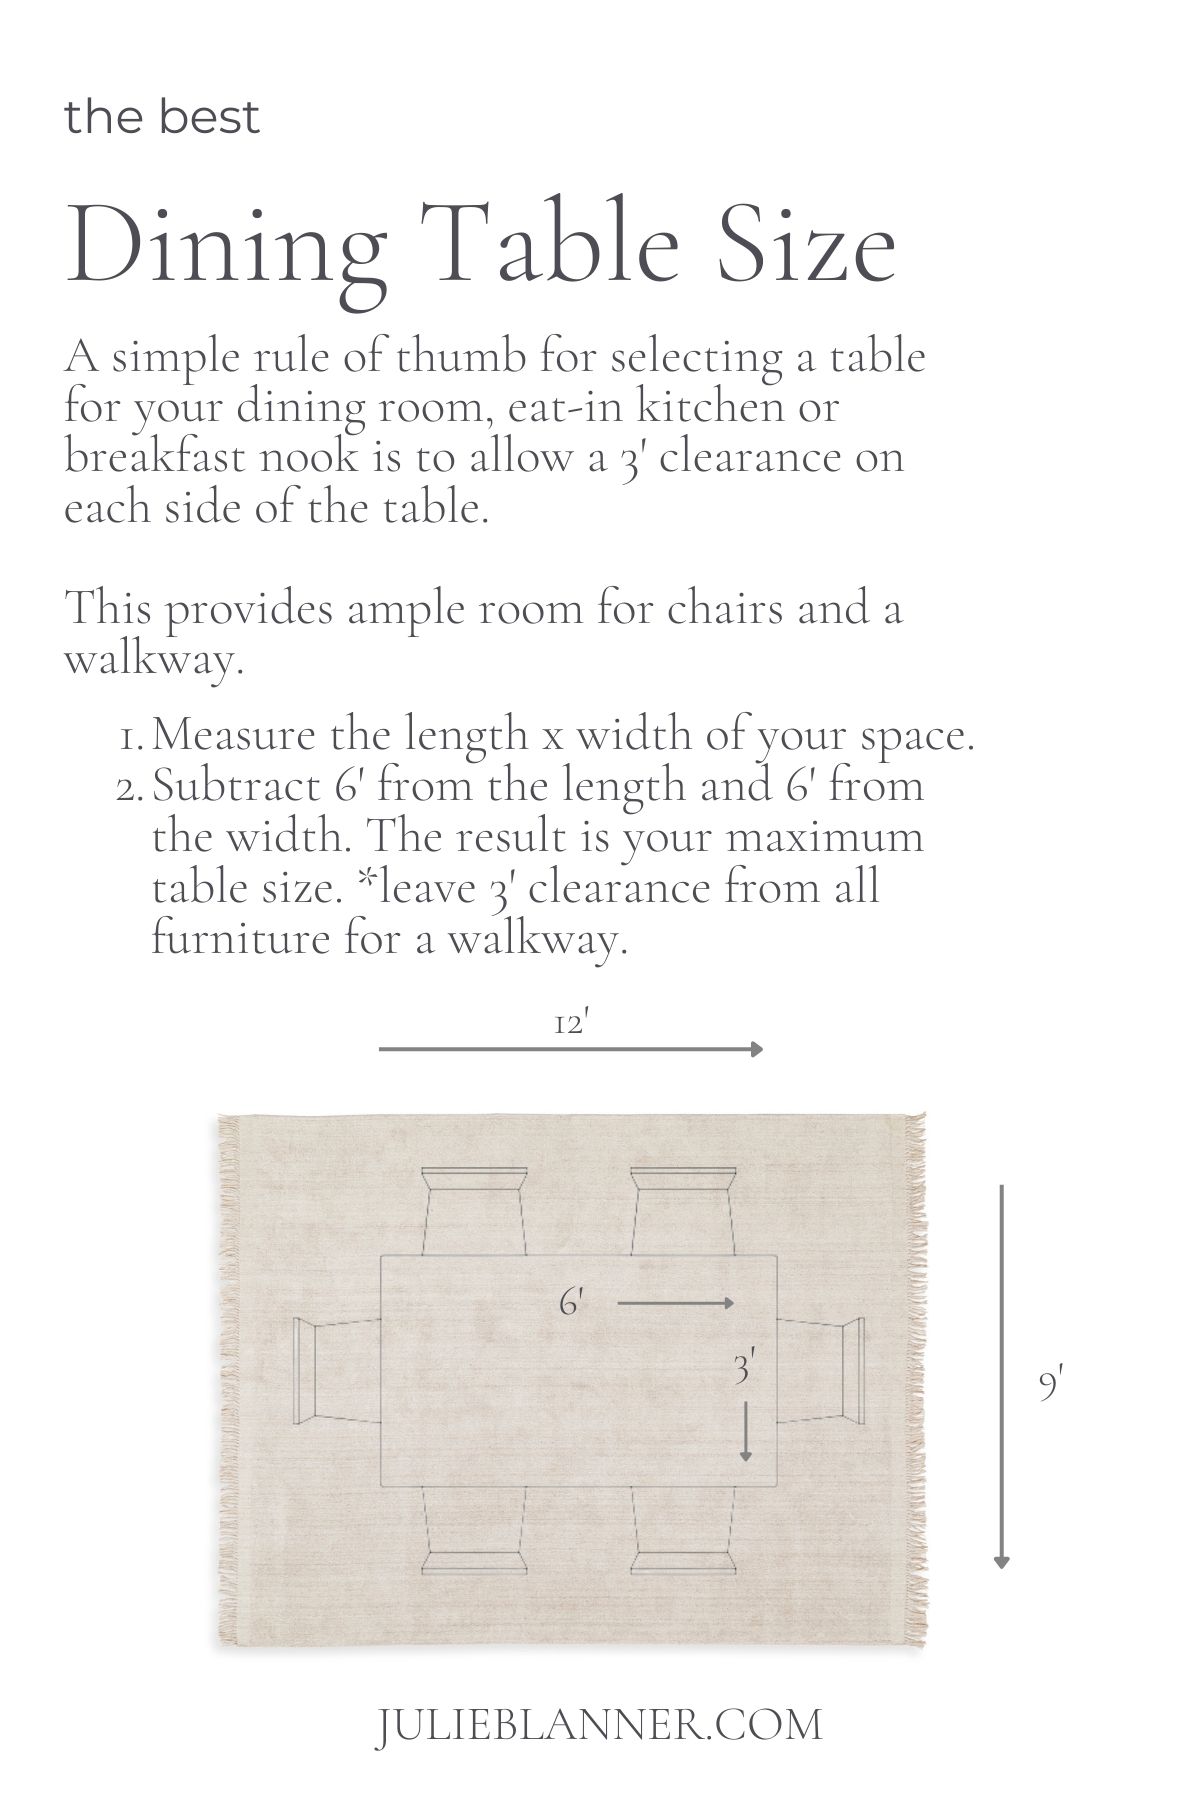 A white graphic with an illustration about dining table height and size